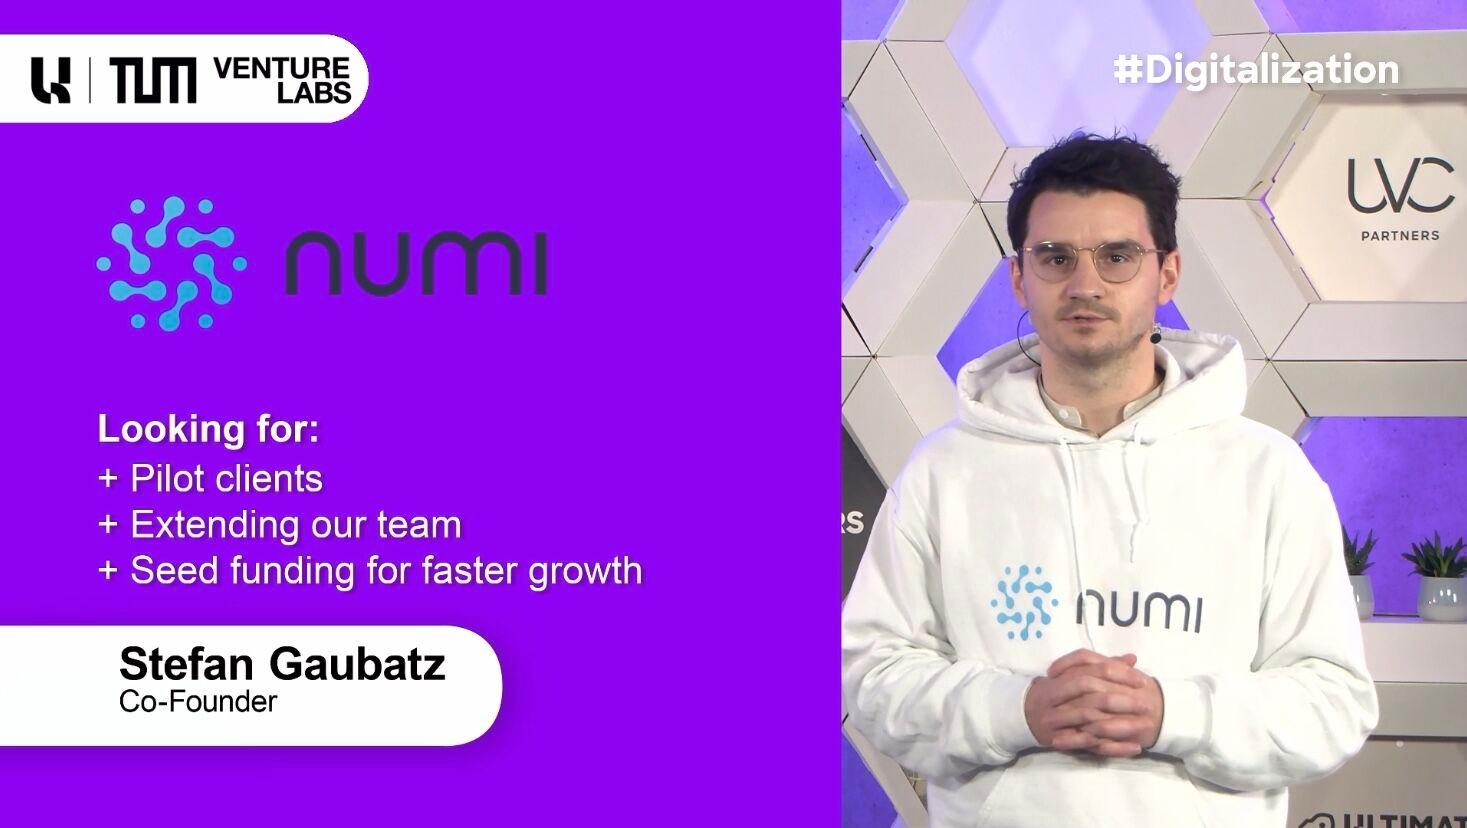 numi on the Ultimate Demo Day